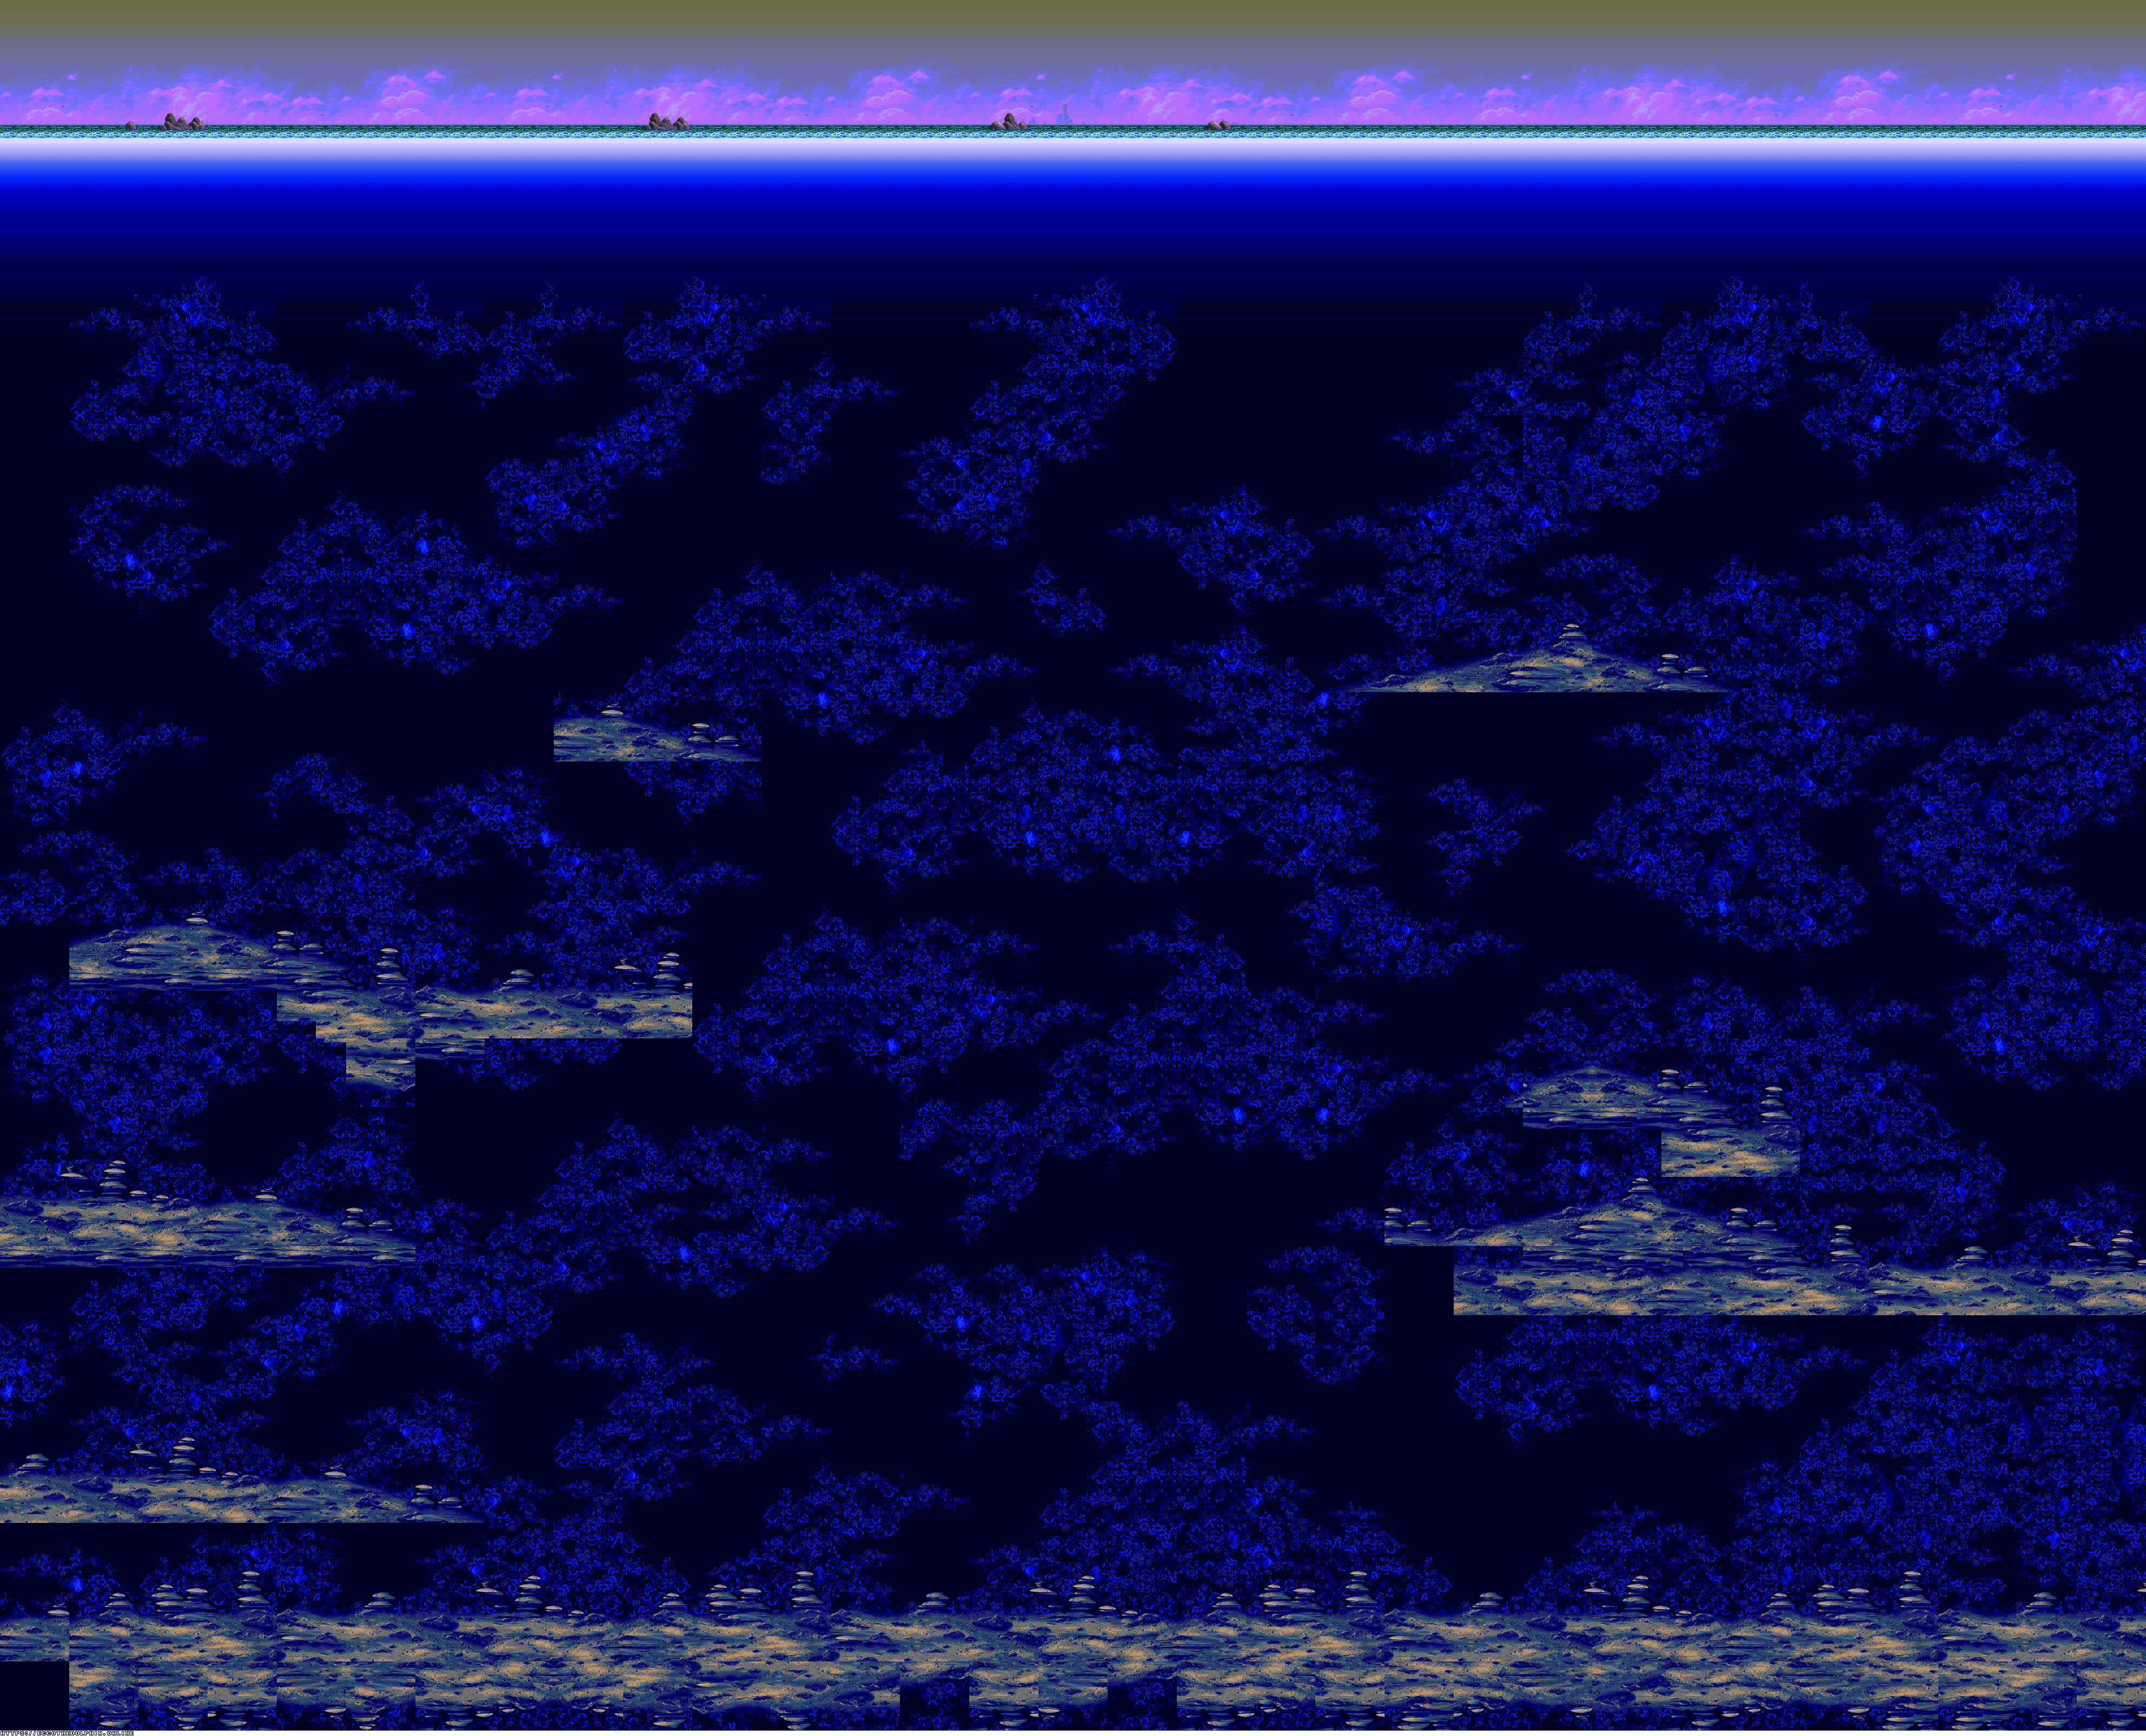 Ecco: The Tides of Time - The Eye (Background)